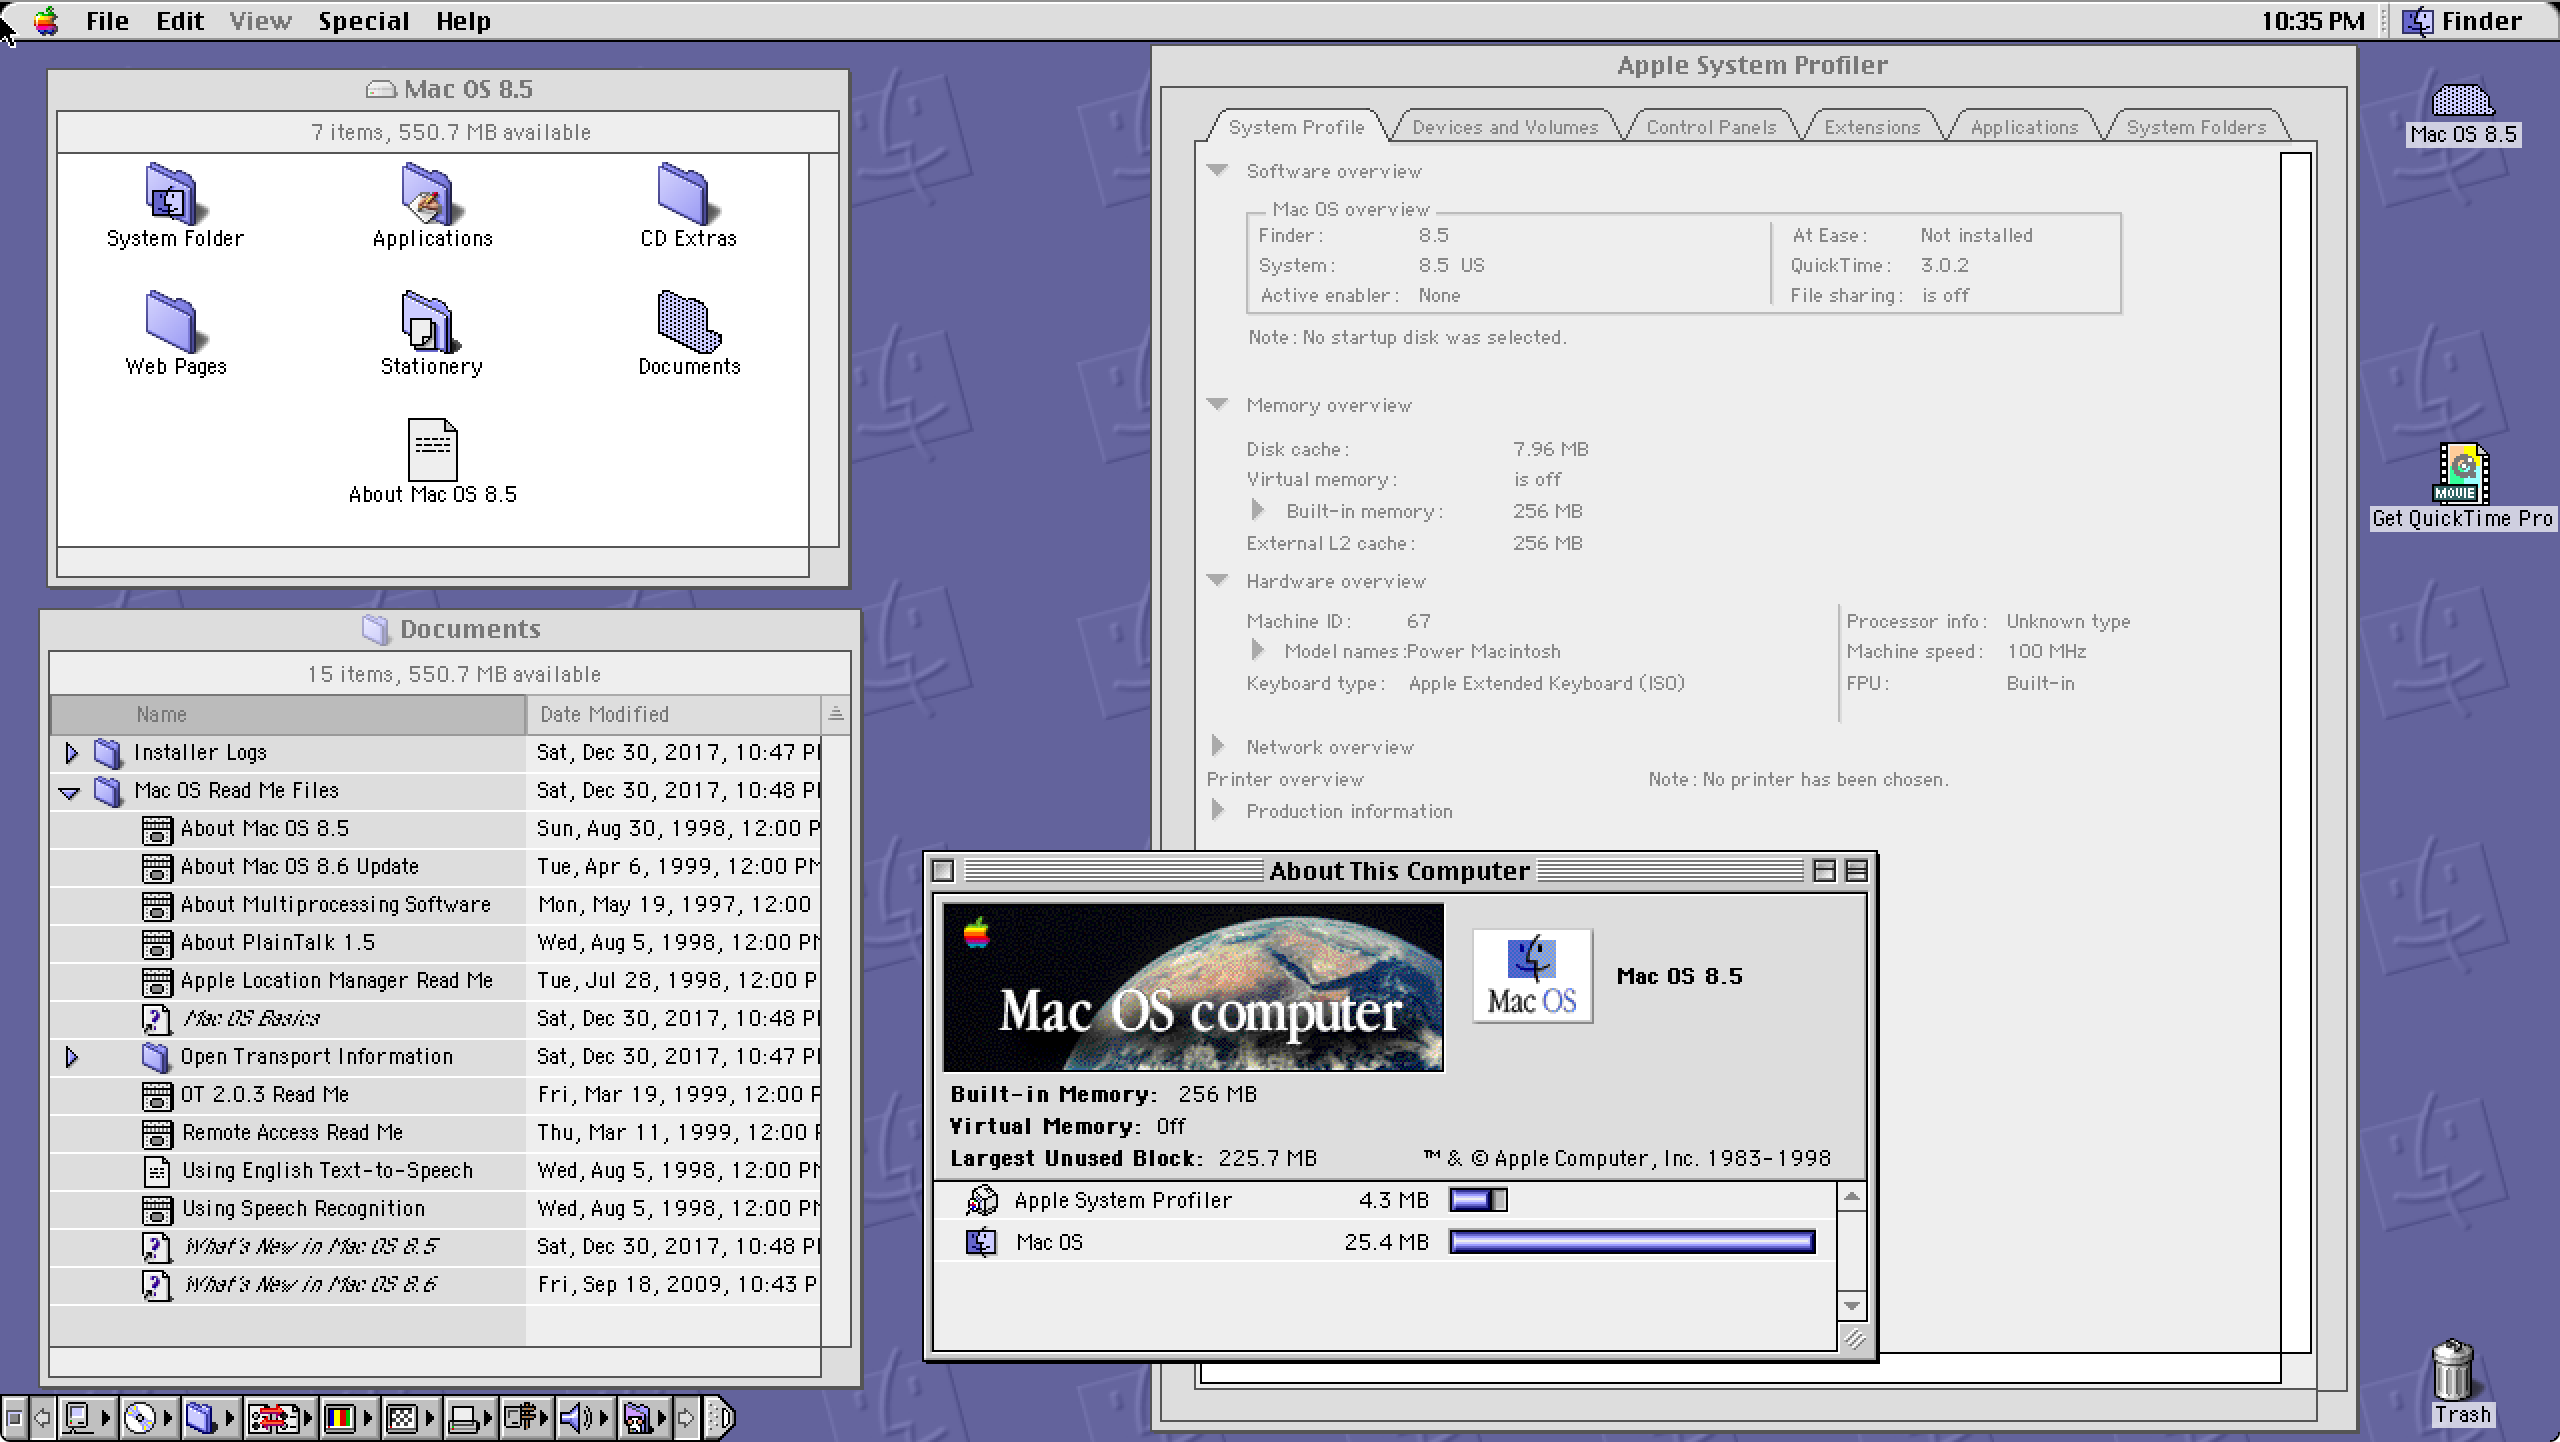 games for mac os 8.6